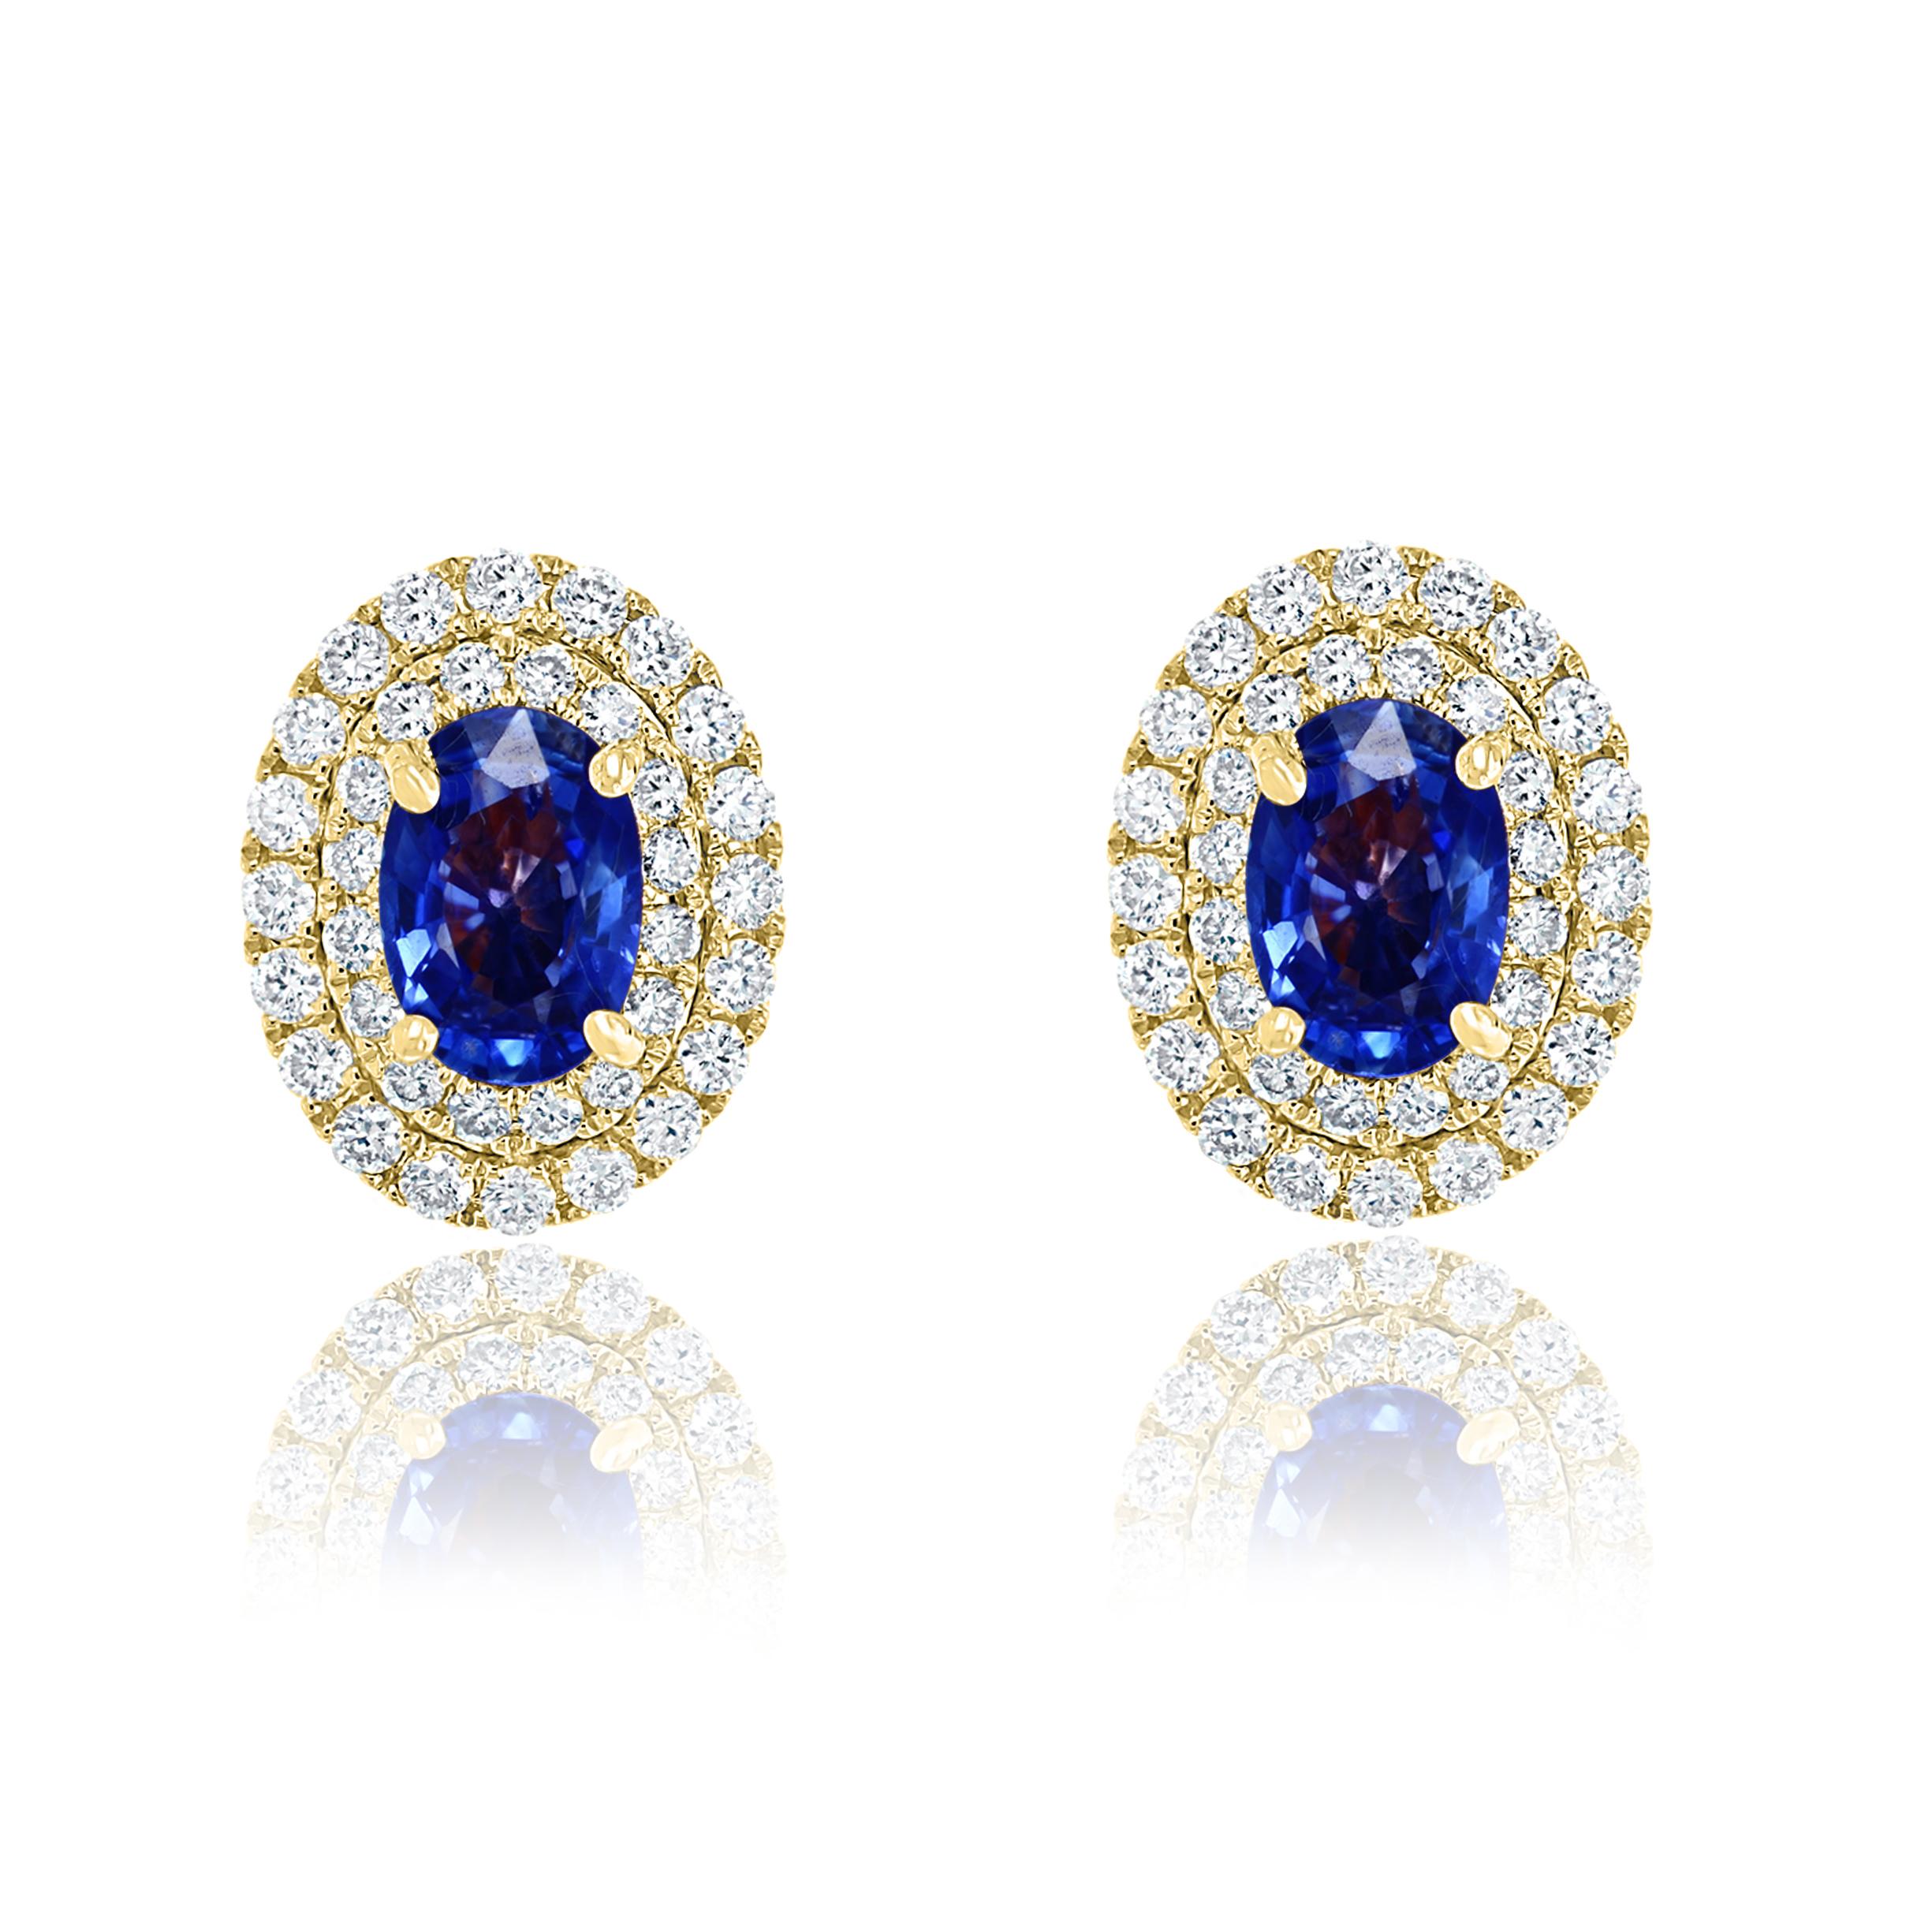 Contemporary 1.03 Carat Oval Cut Blue Sapphire and Diamond Stud Earrings in 18K Yellow Gold For Sale